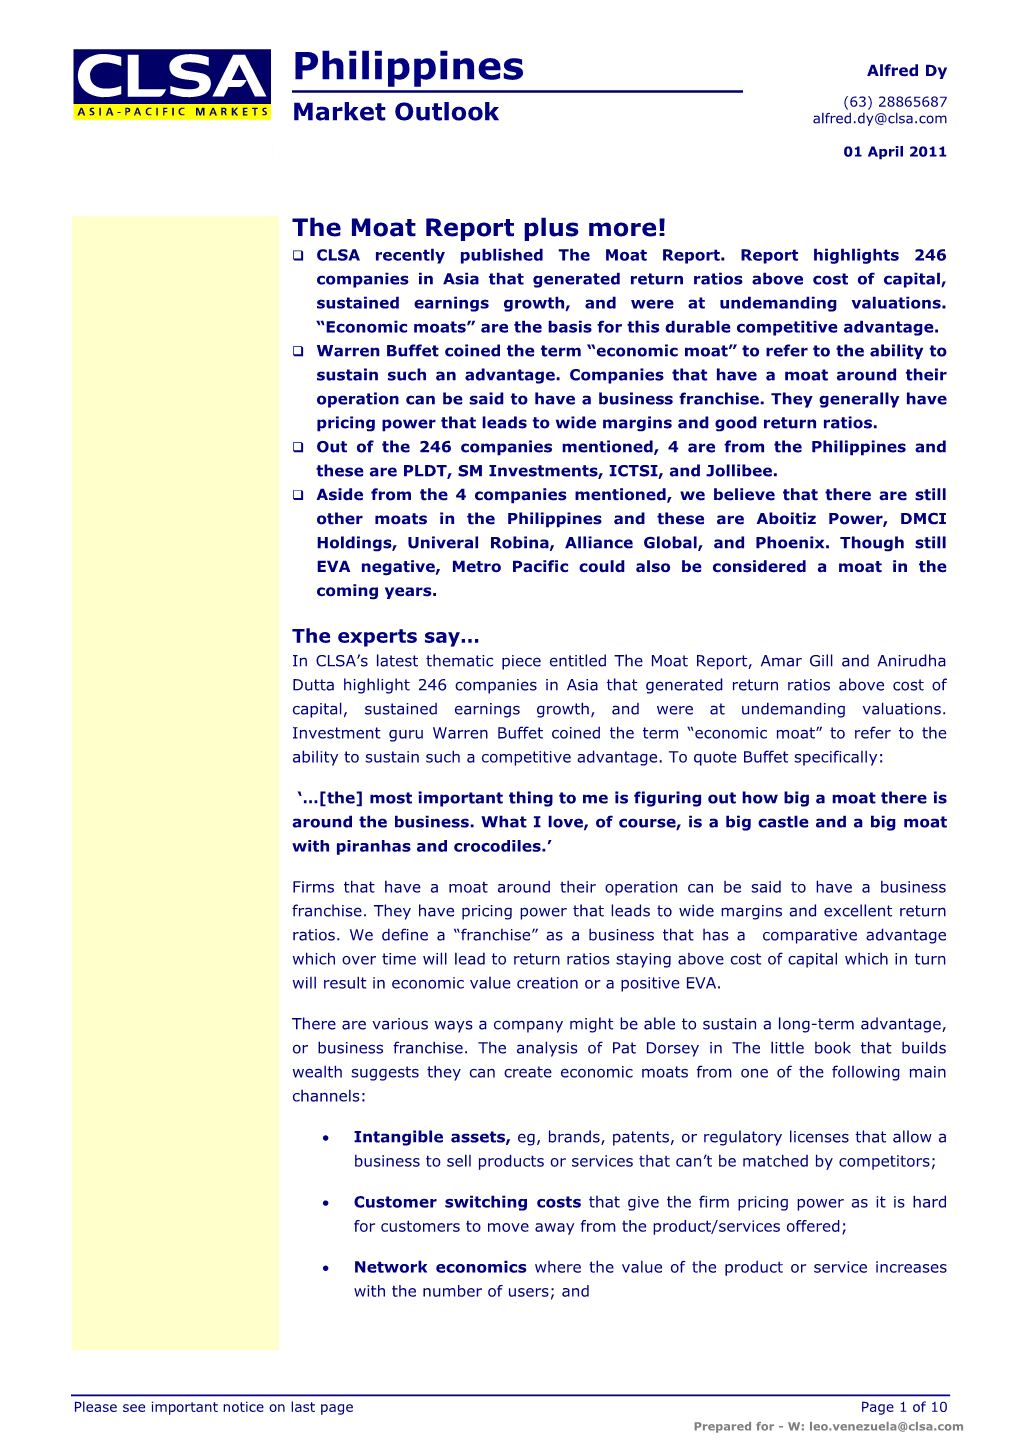 The Moat Report Plus More! Q CLSA Recently Published the Moat Report